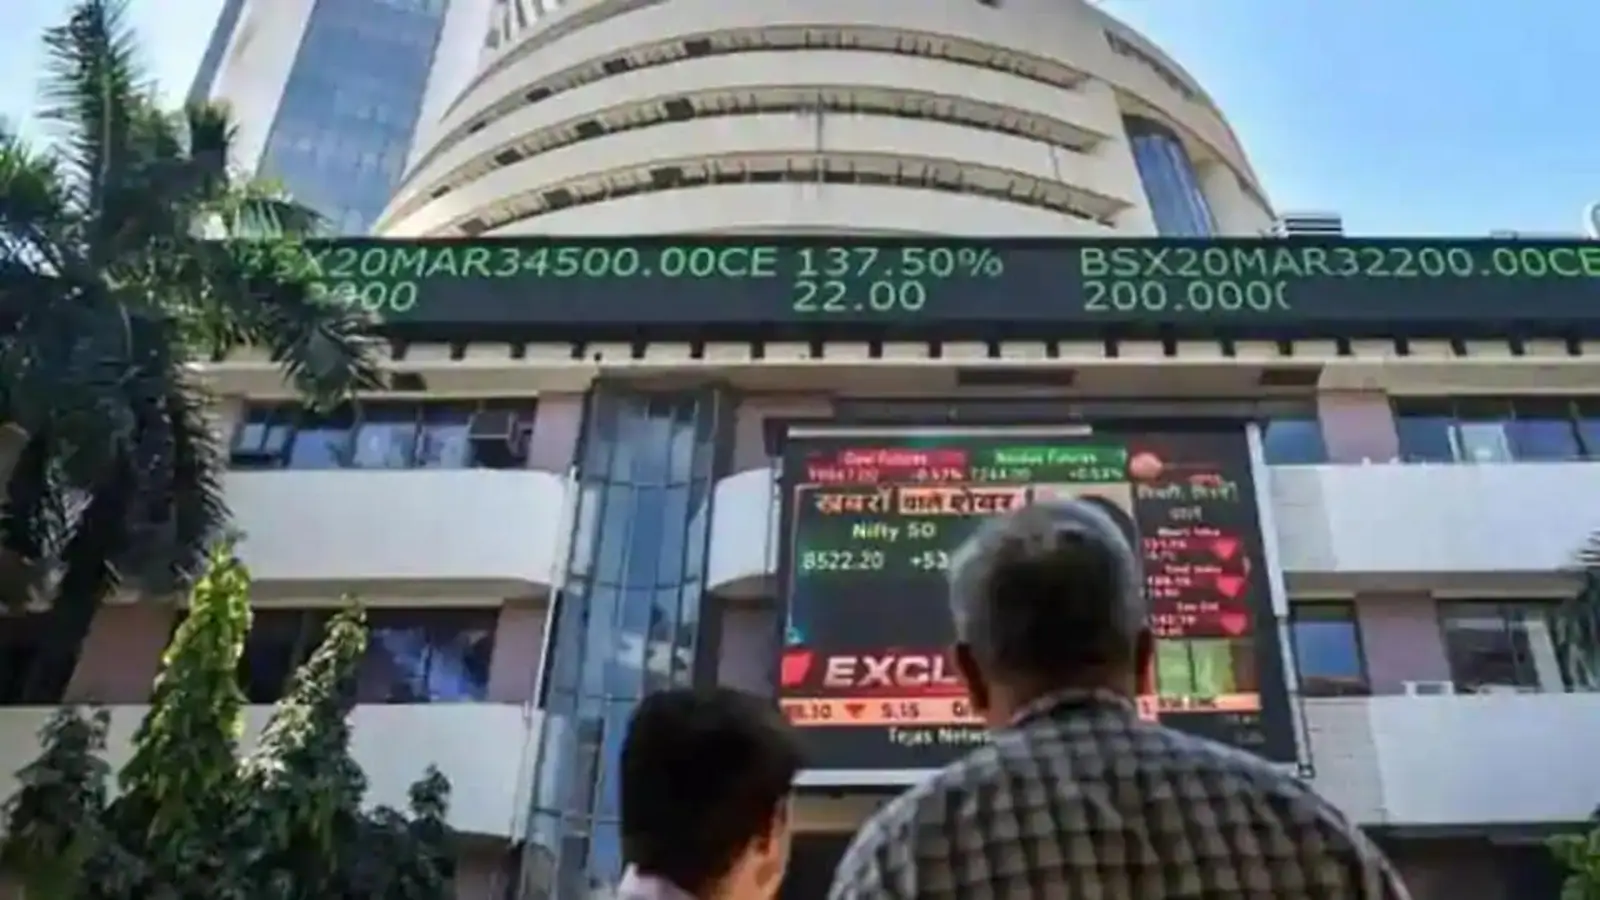 Sensex up by 1,328 points to close at 55,858; Nifty ends session at 16,669